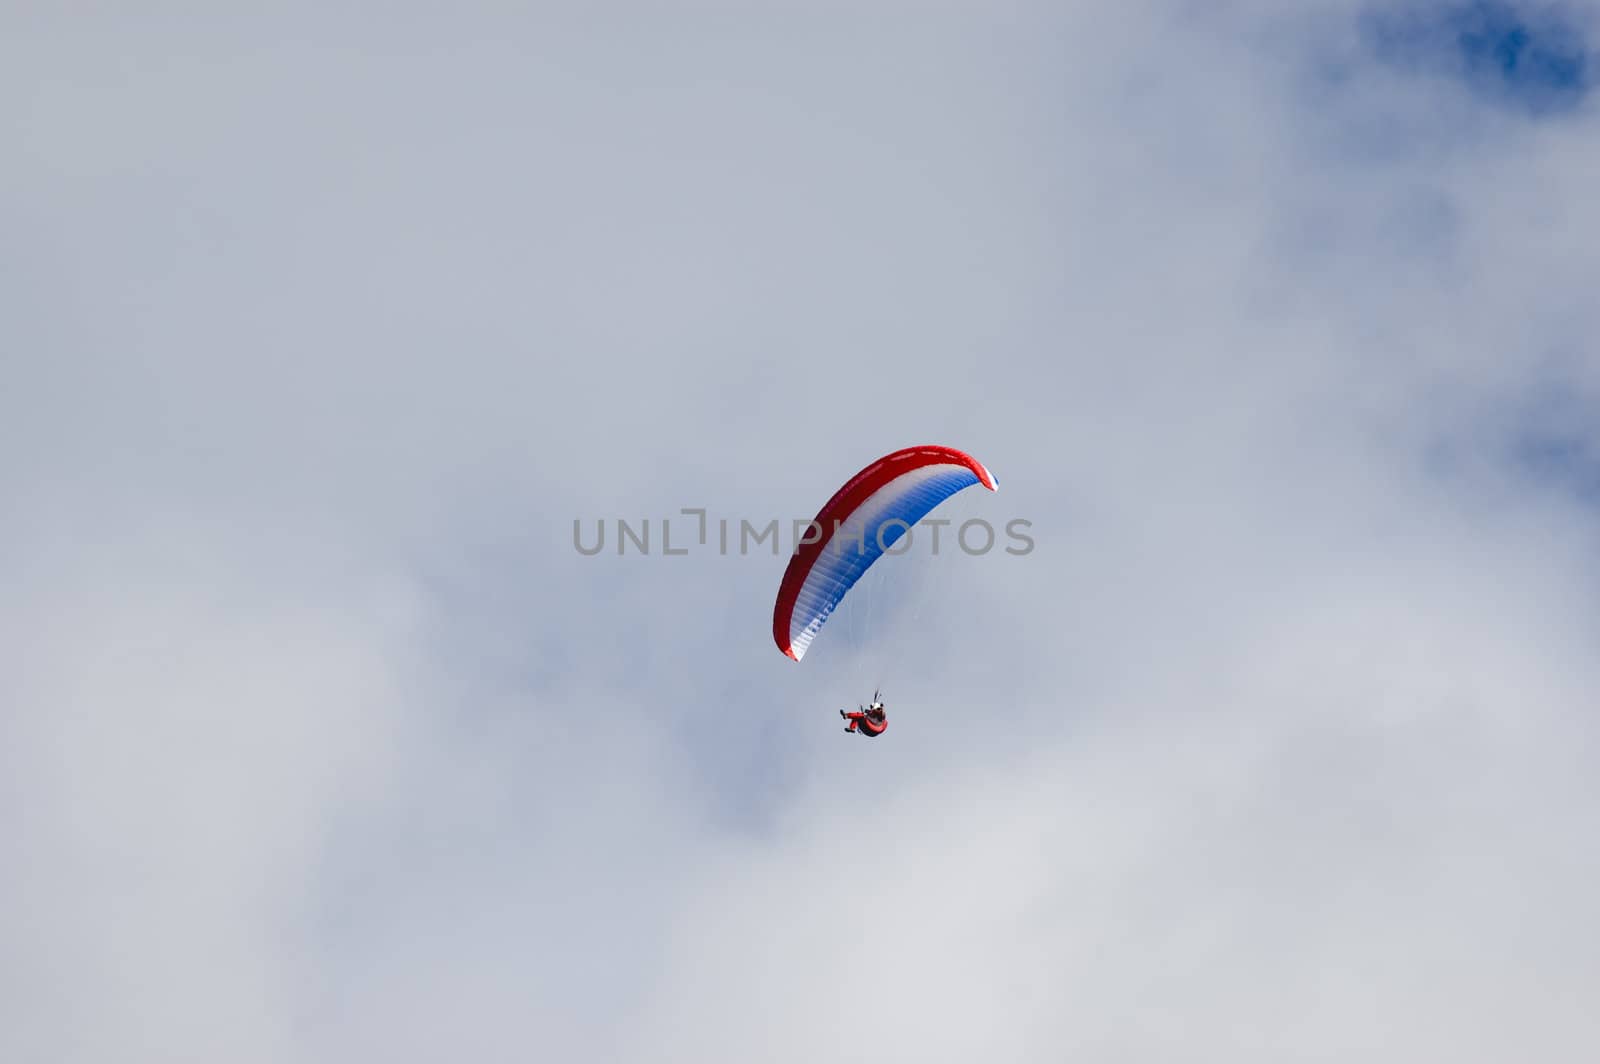 Man enjoying the ride in a blue white red paraglider